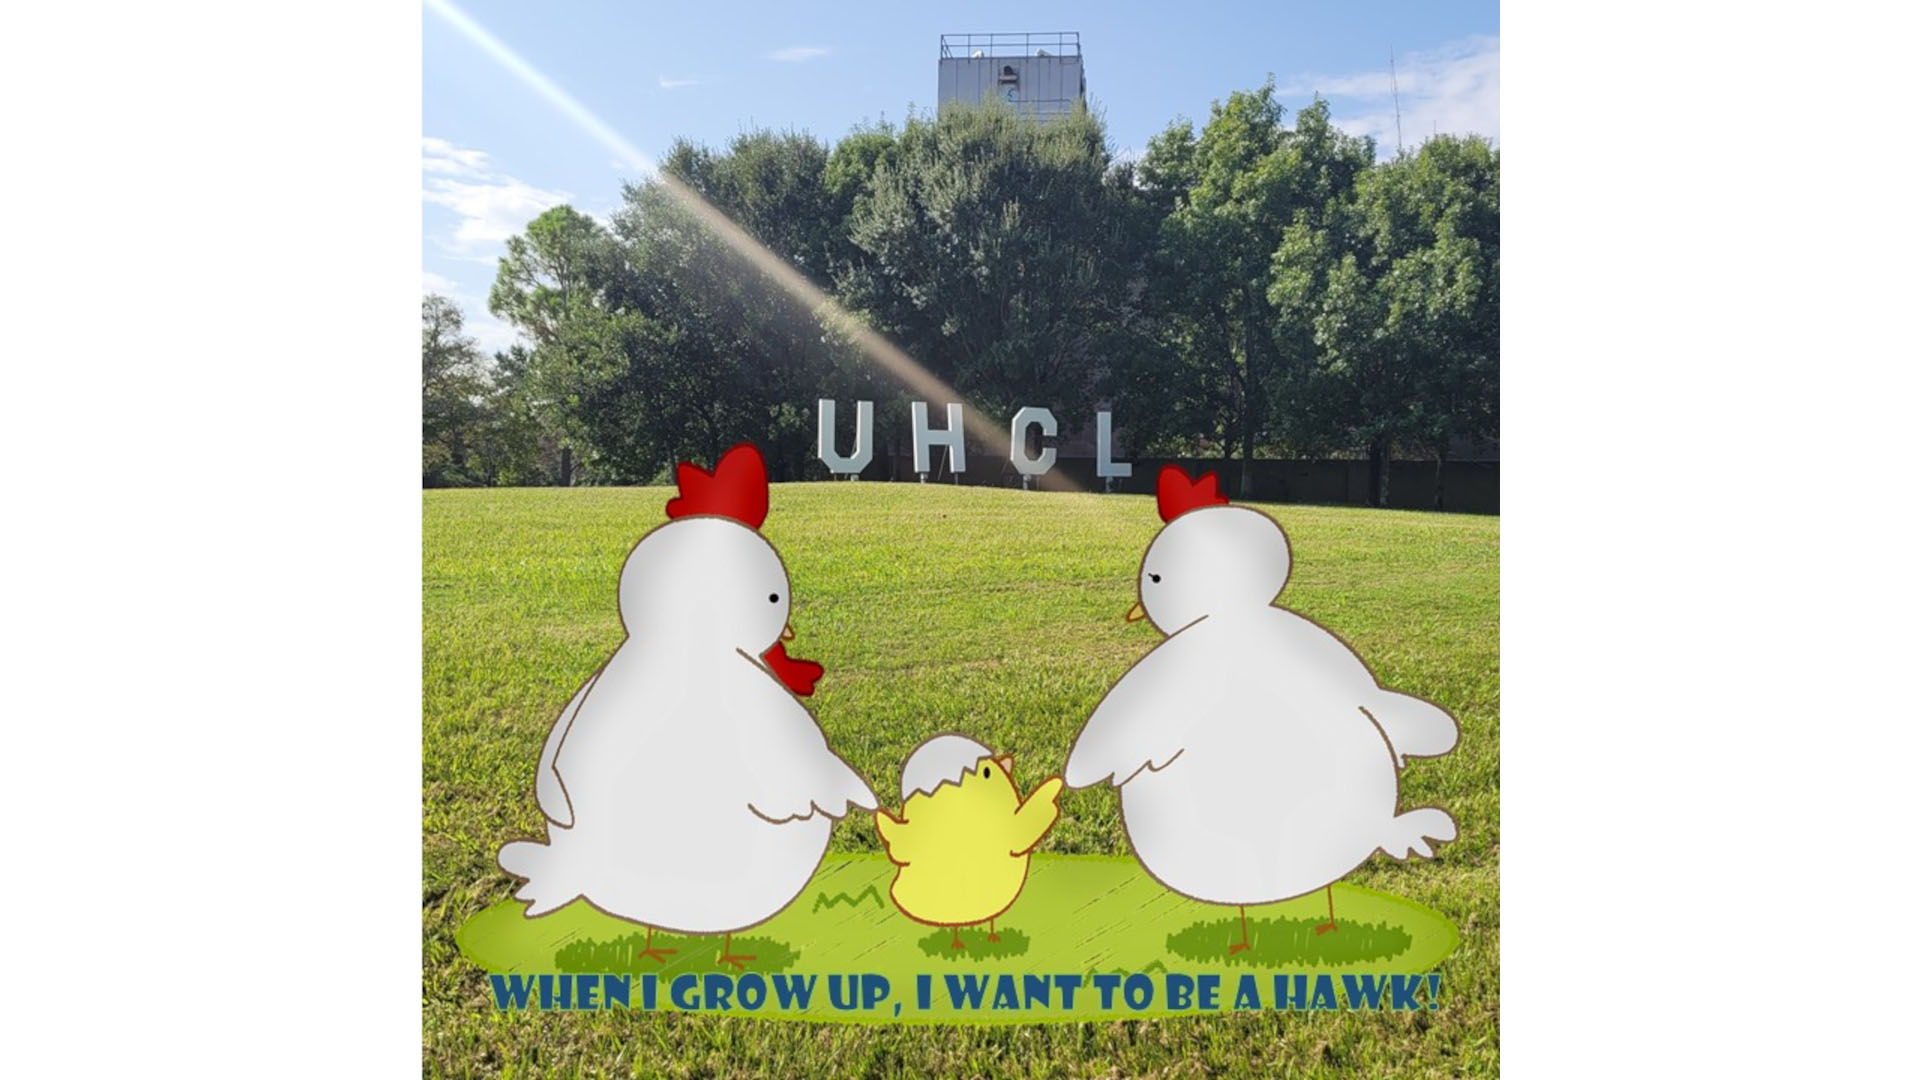 Title: When I Grow Up, I Want To Be A Hawk. Two chickens hold hands with a baby chick in front of the UHCL letters.